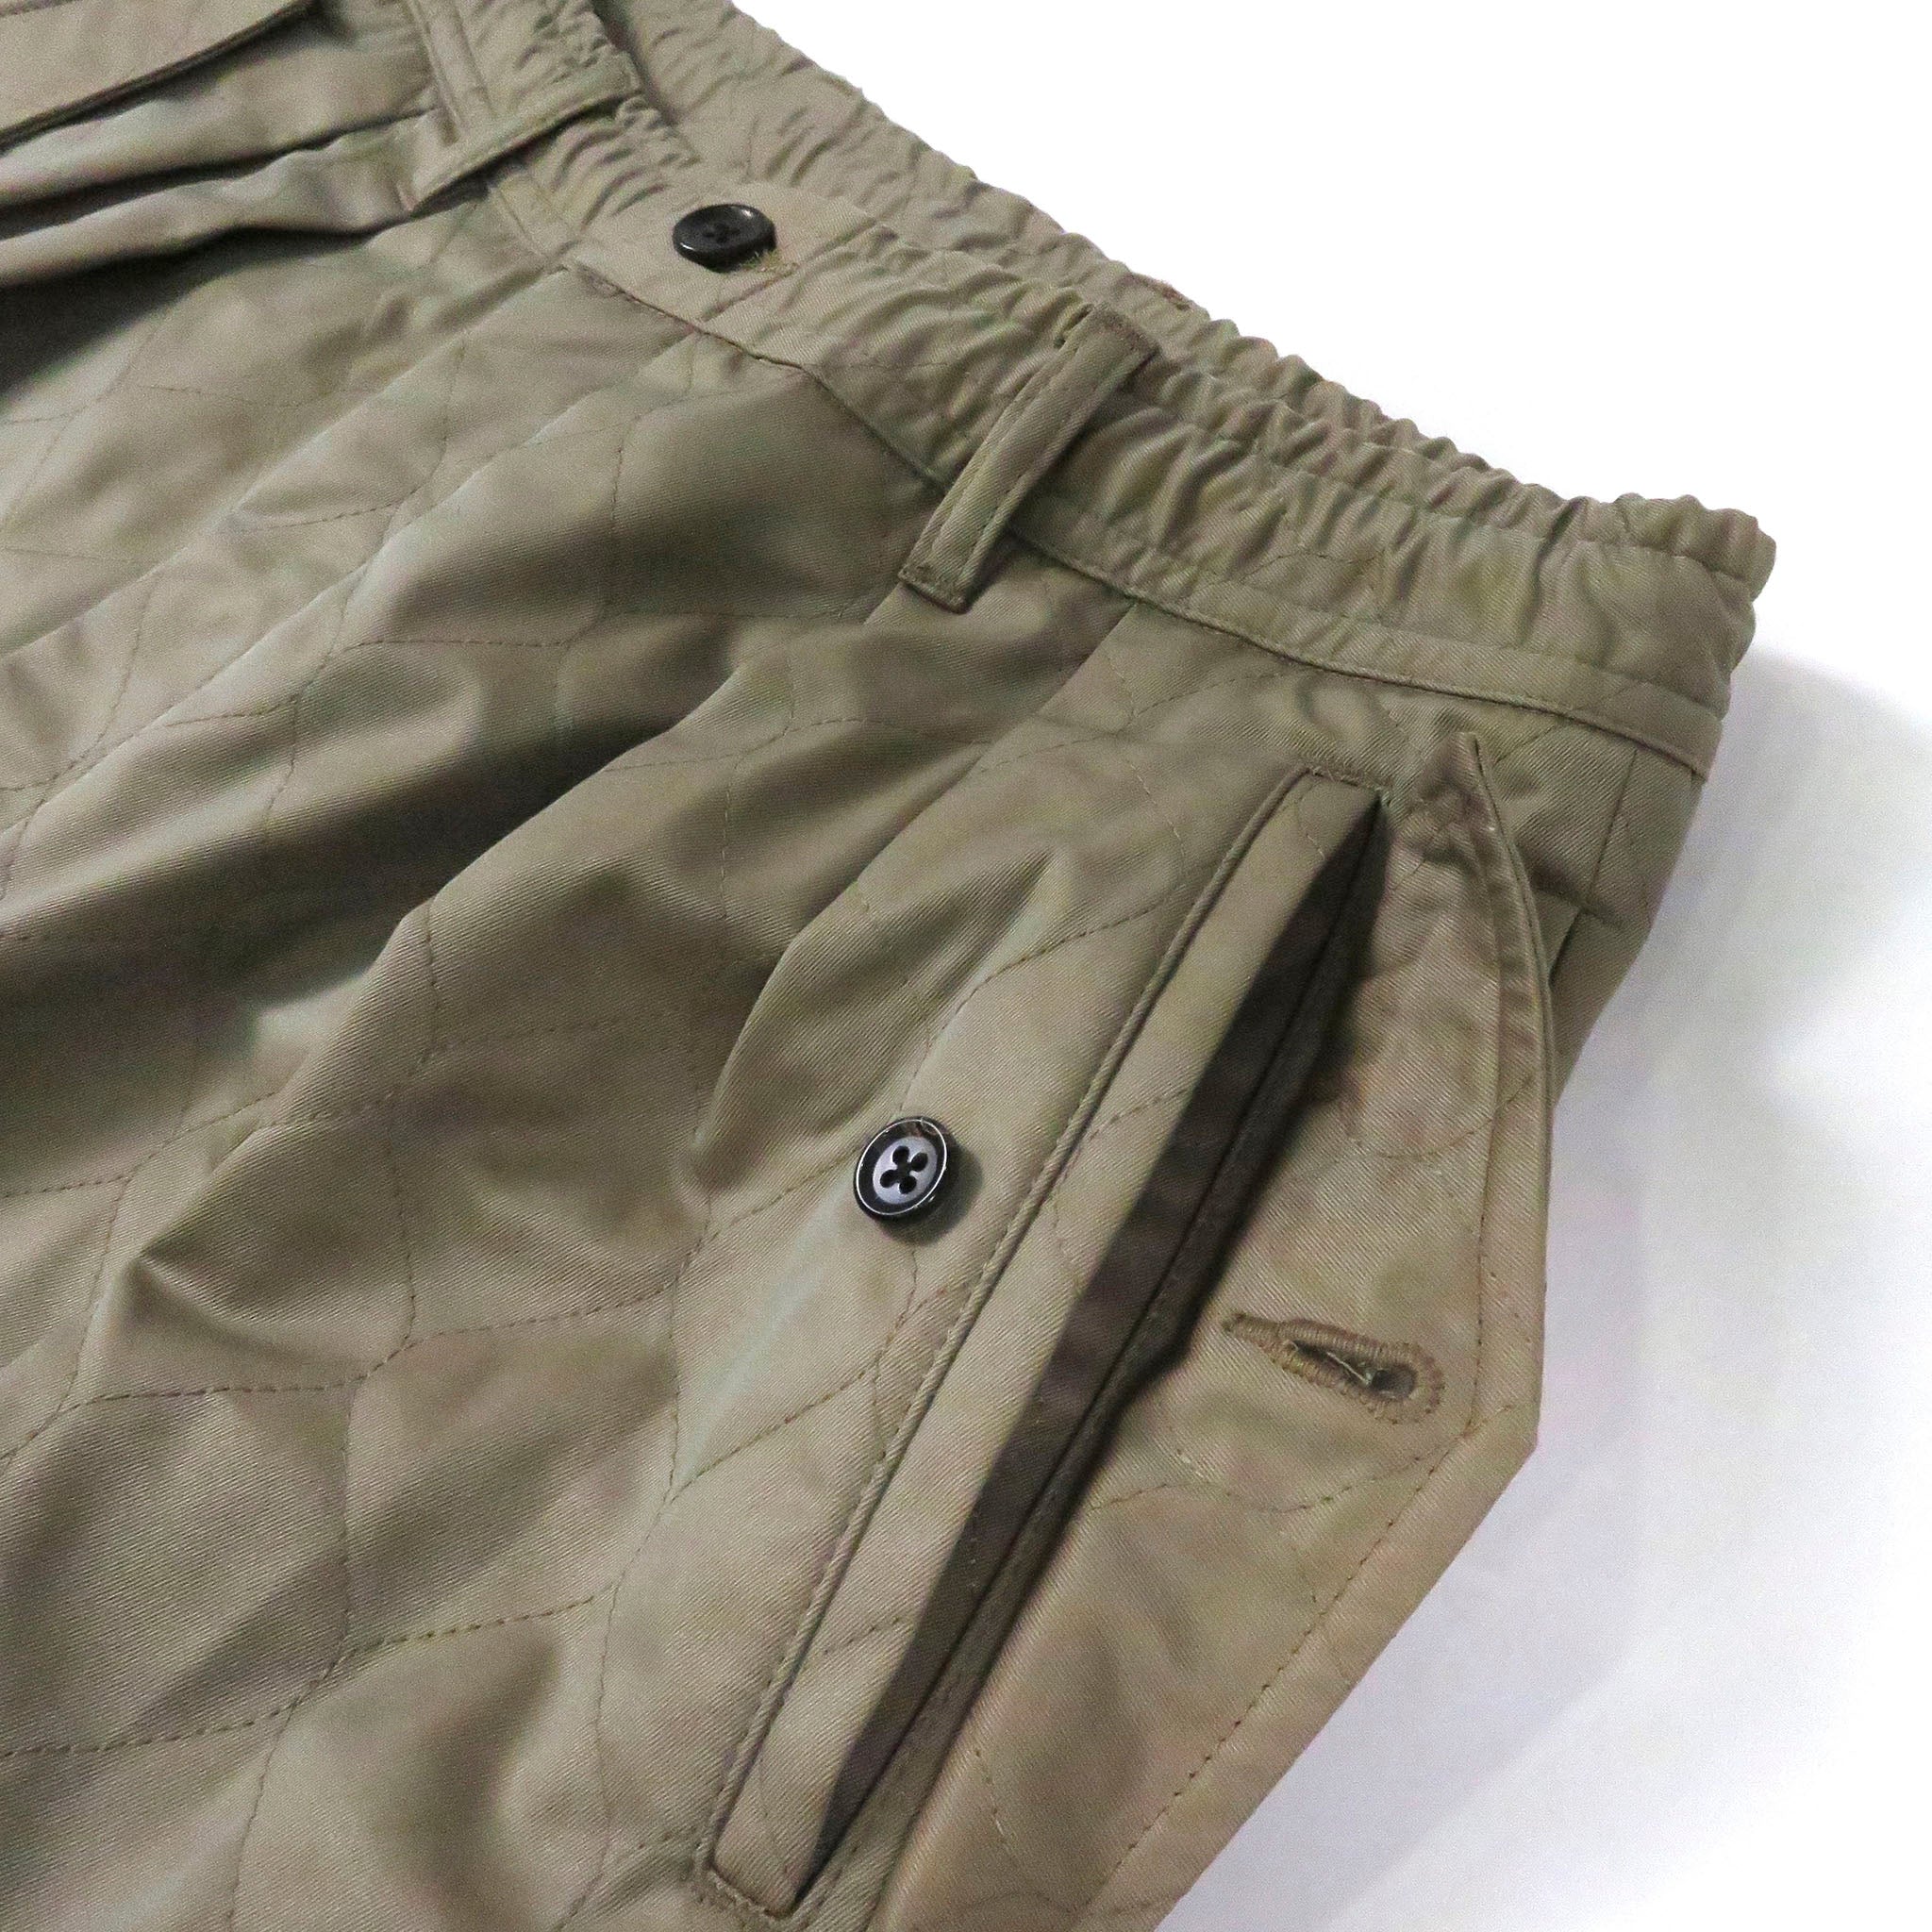 tieorNOT "BEETLE QUILTED EASY TROUSERS"